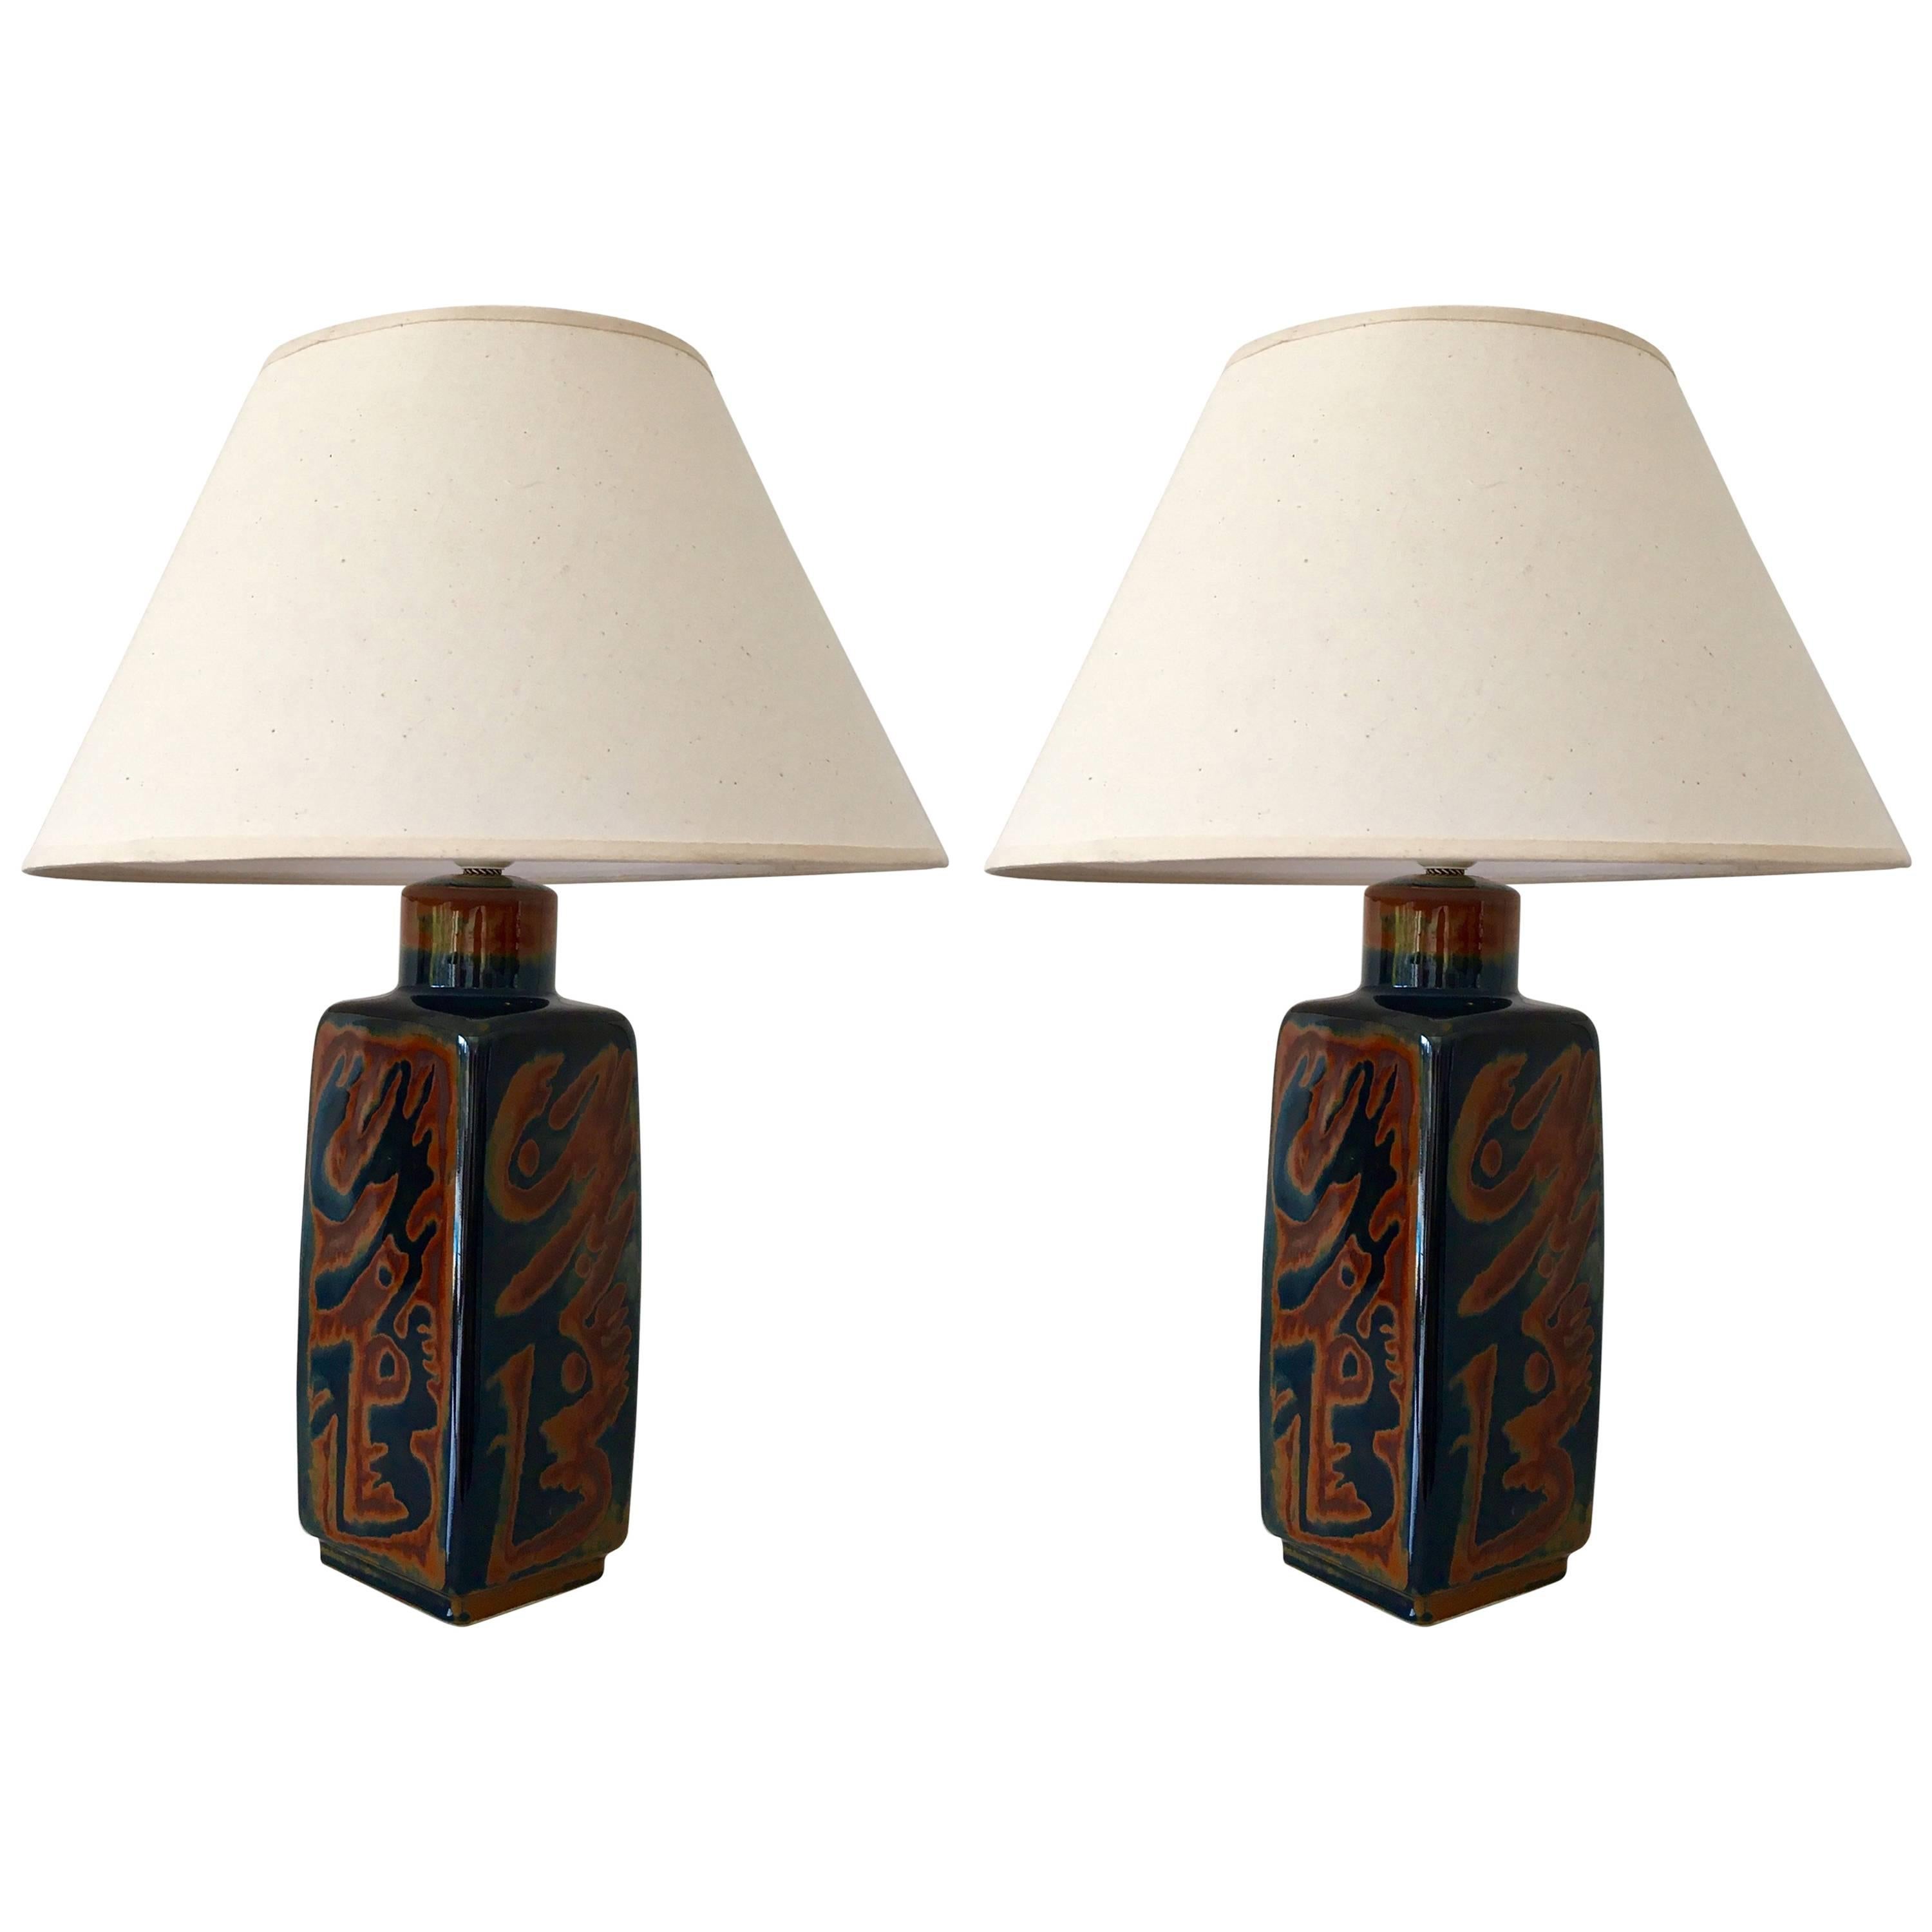 Pair of Ceramic Table Lamps by Carl Harry Stalhane, Sweden, circa 1960 For Sale